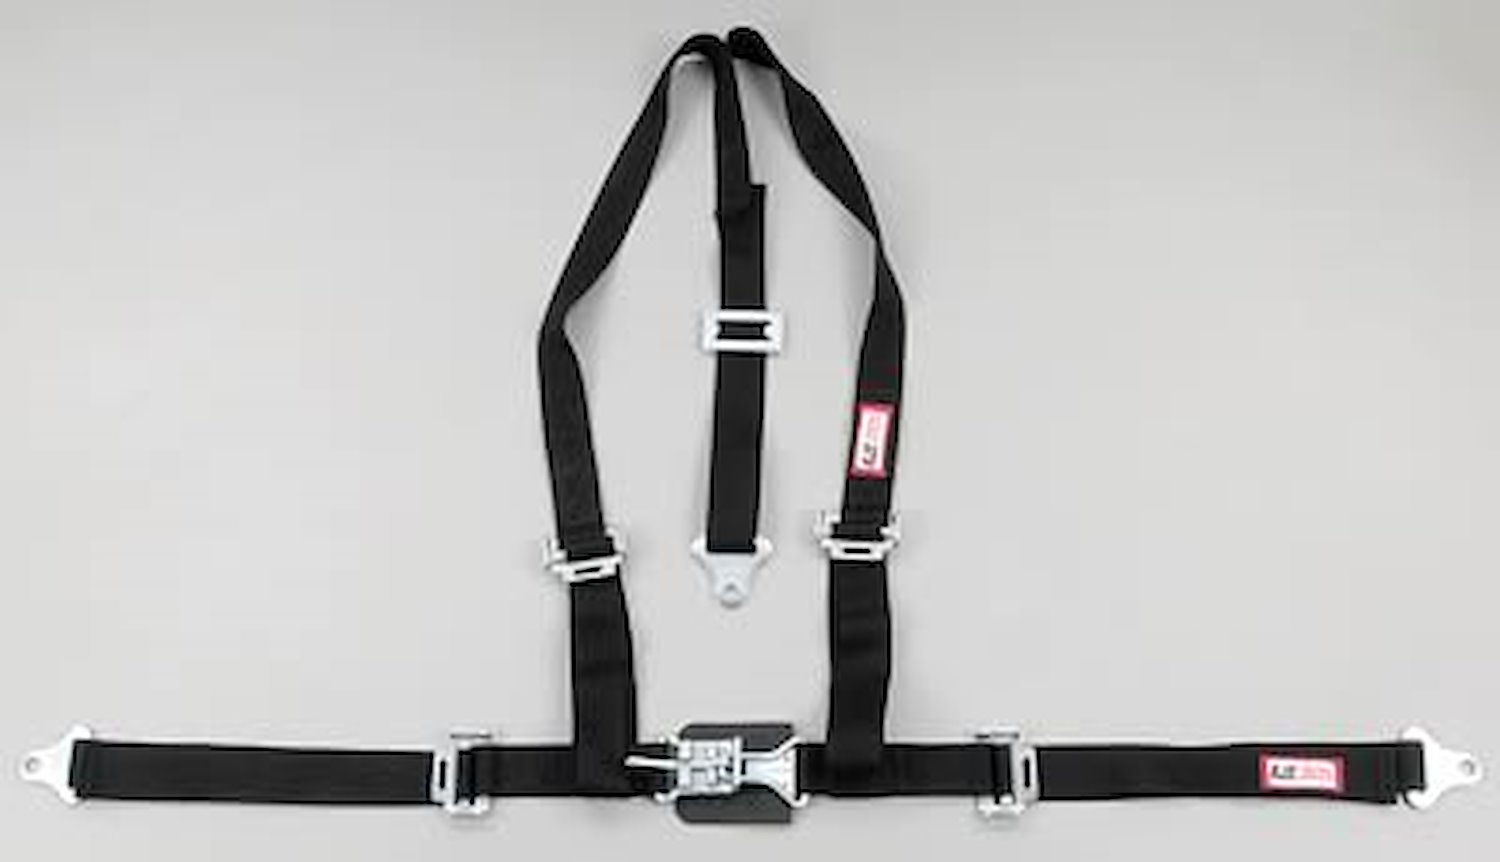 NON-SFI L&L HARNESS 2 PULL DOWN Lap Belt SEWN IN 2 S.H. Y FLOOR Mount w/STERNUM STRAP ALL WRAP ENDS HOT PINK